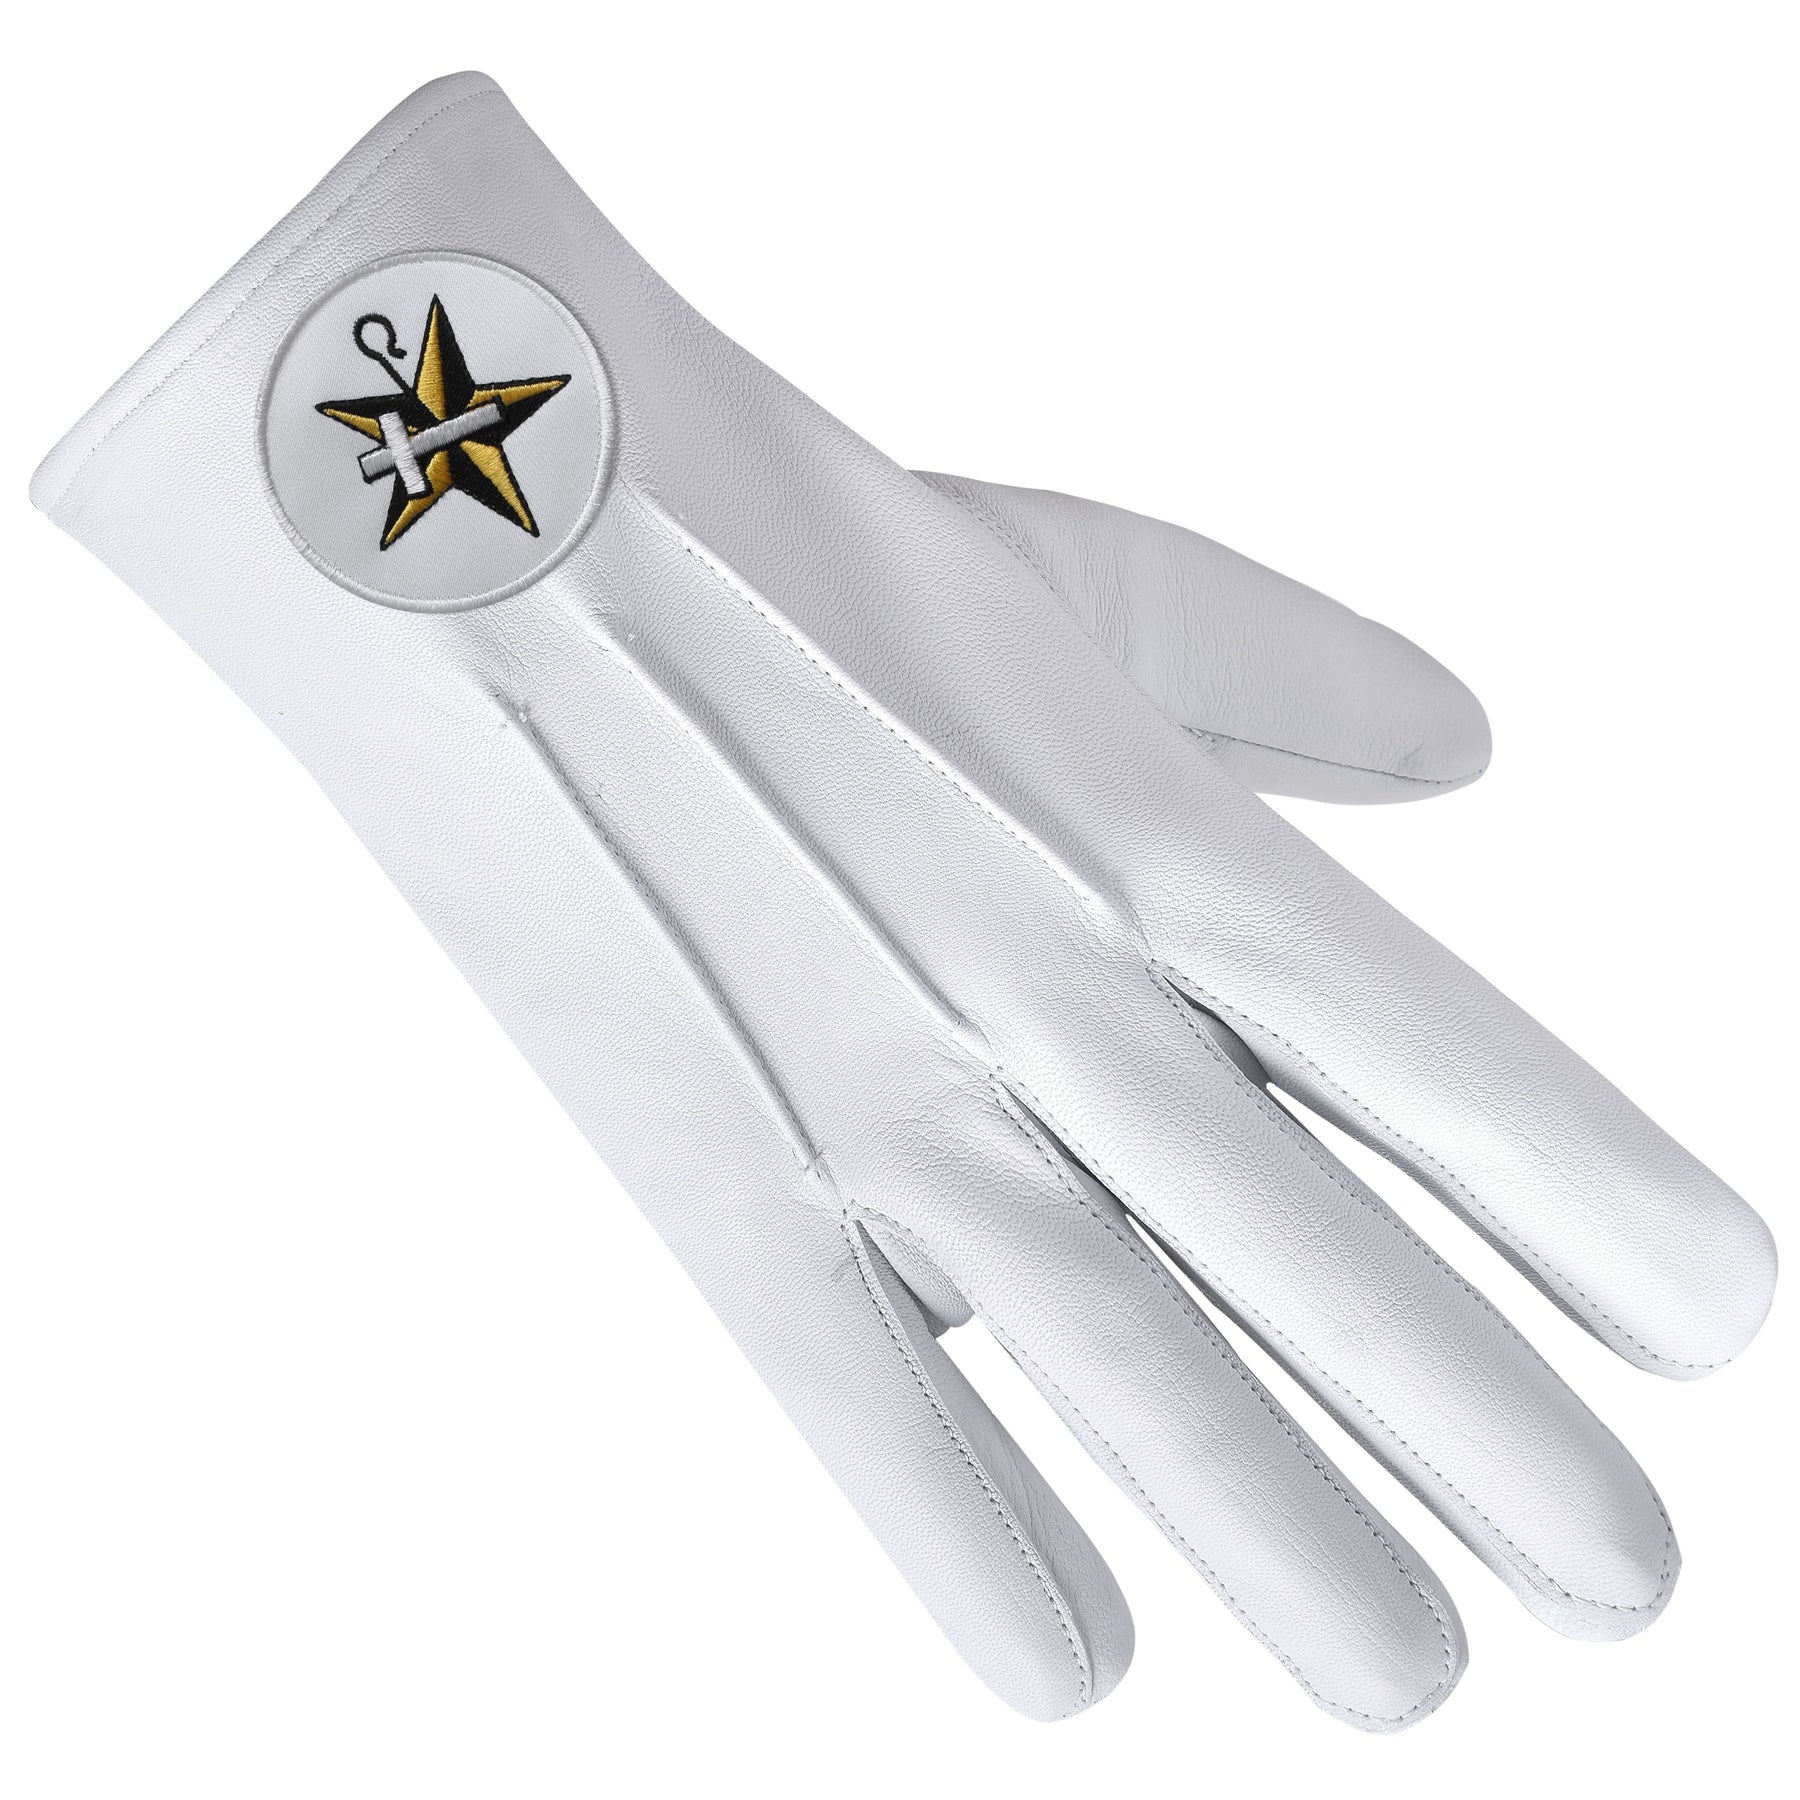 The Order Of The White Shrine Of Jerusalem Glove - Leather With White Patch - Bricks Masons